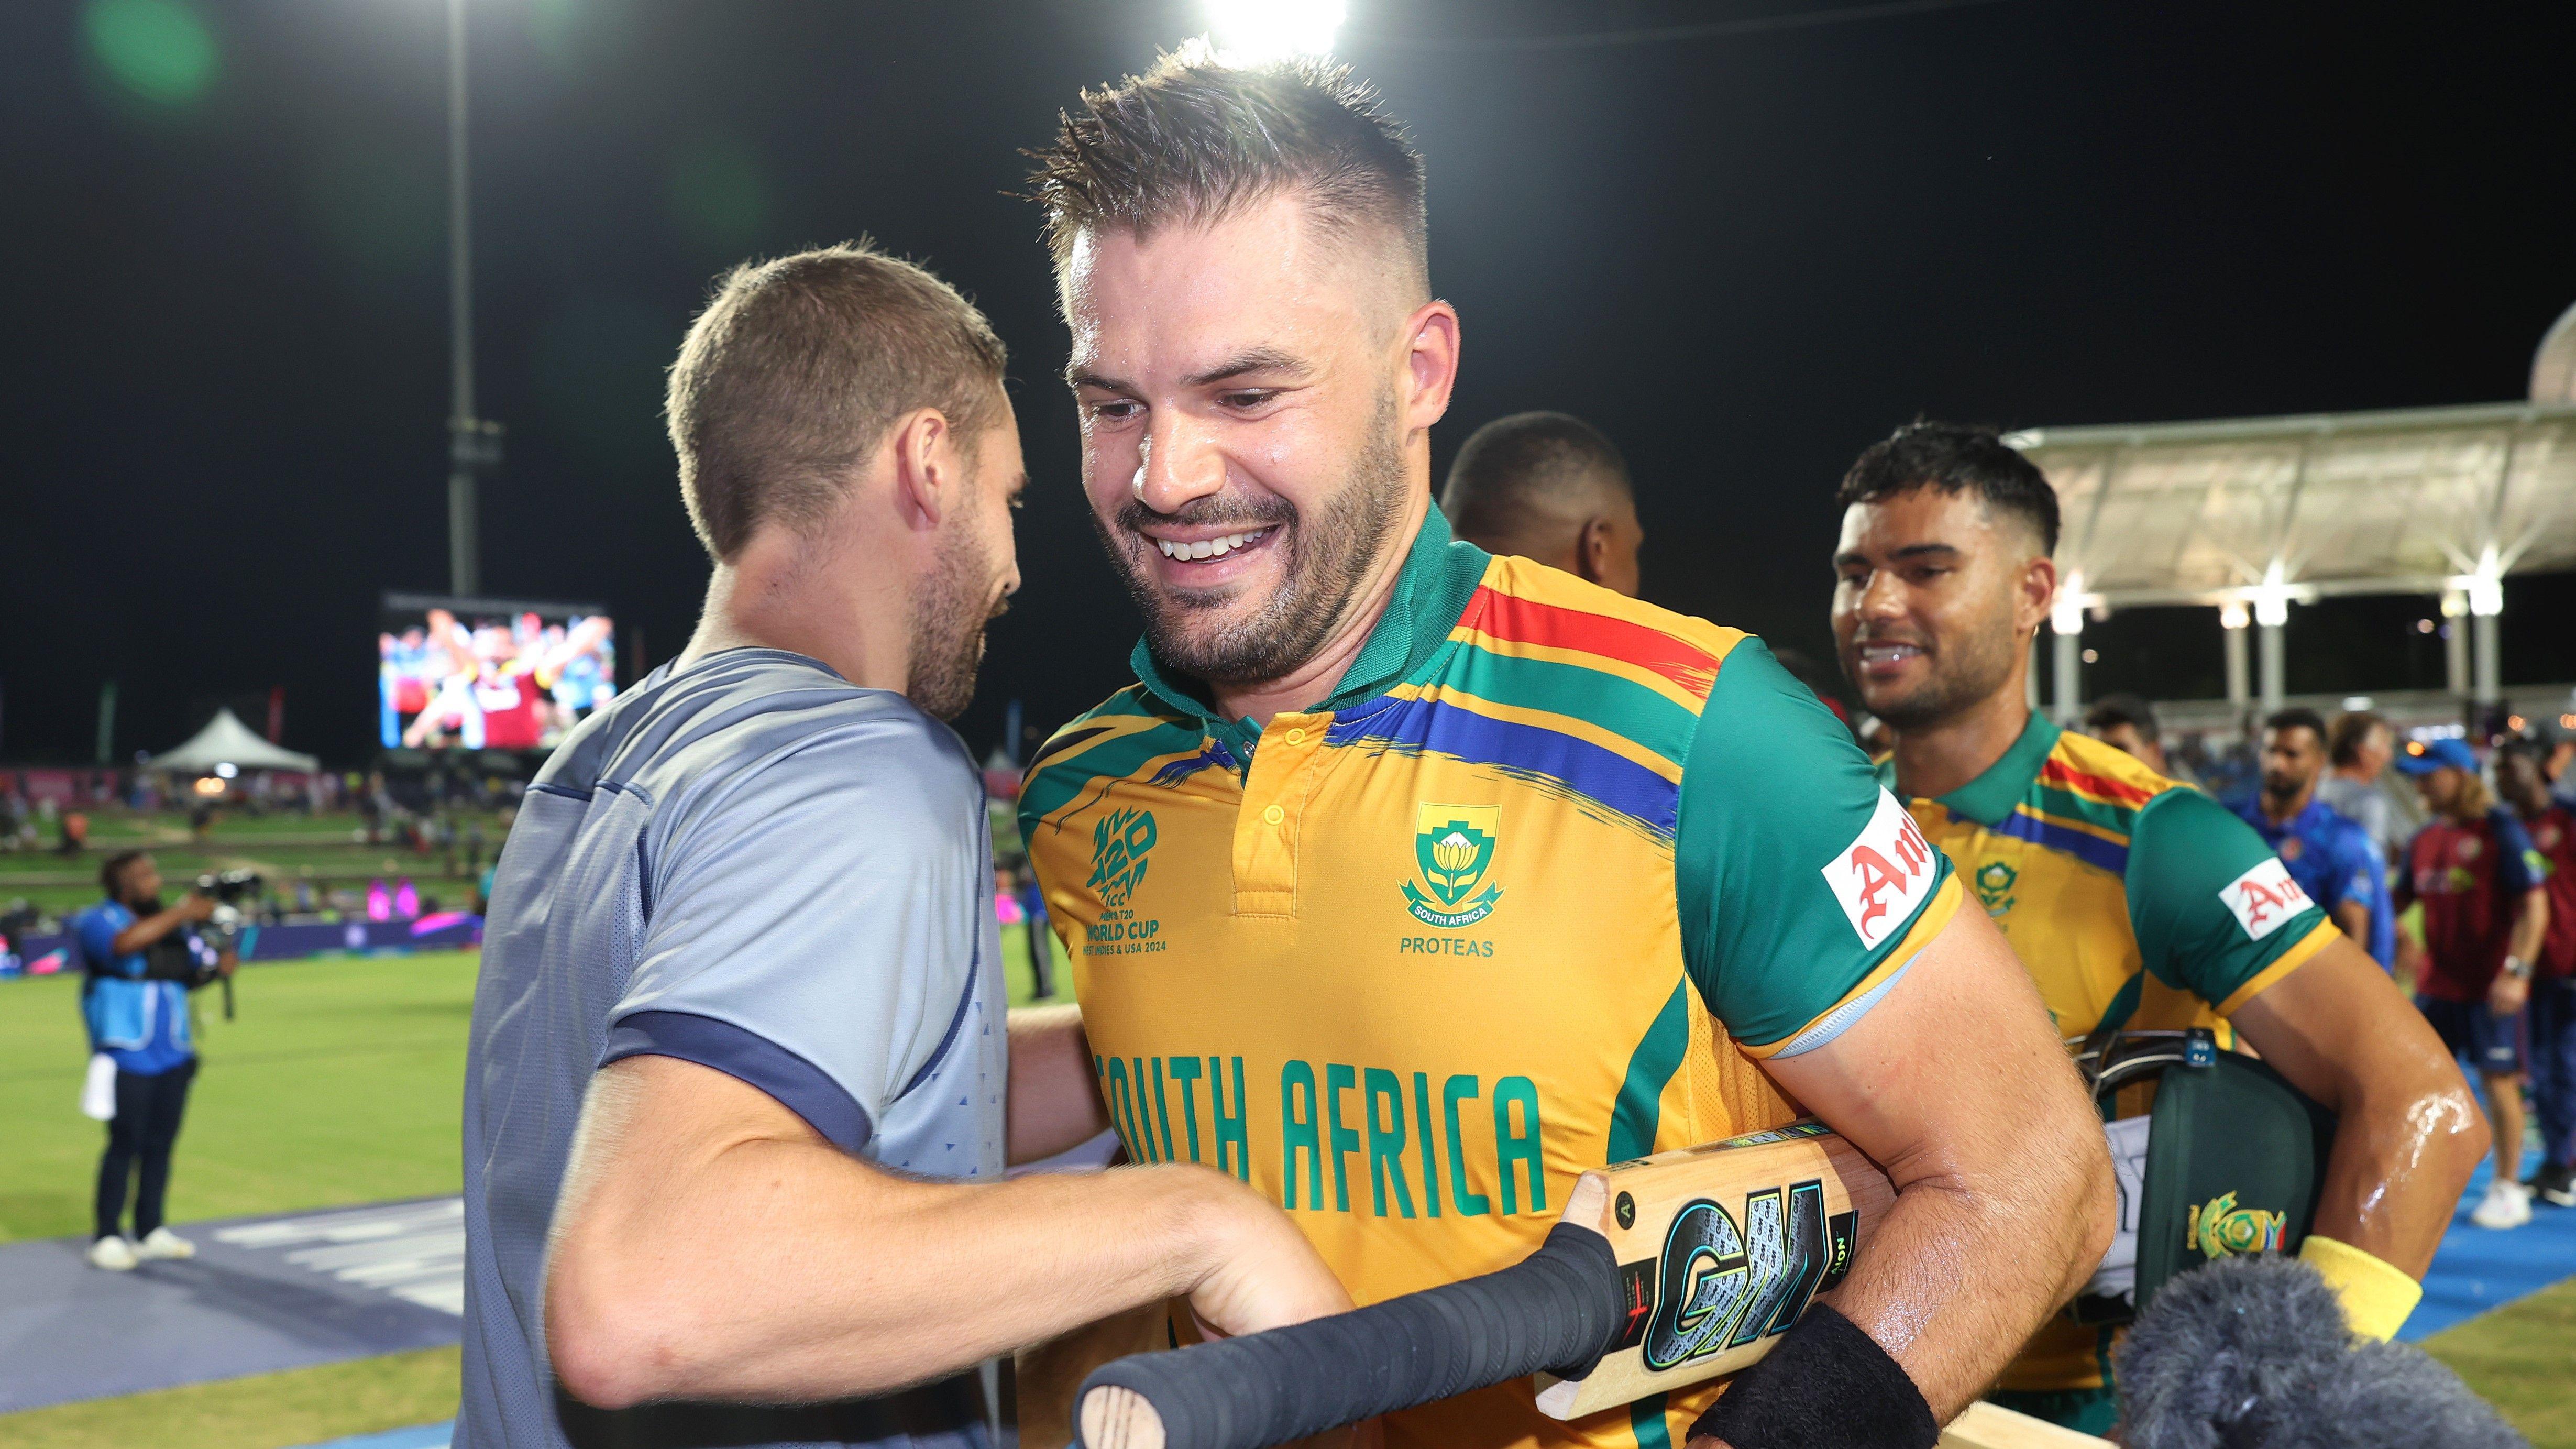 South Africa thrash Afghanistan to reach first mens World Cup final